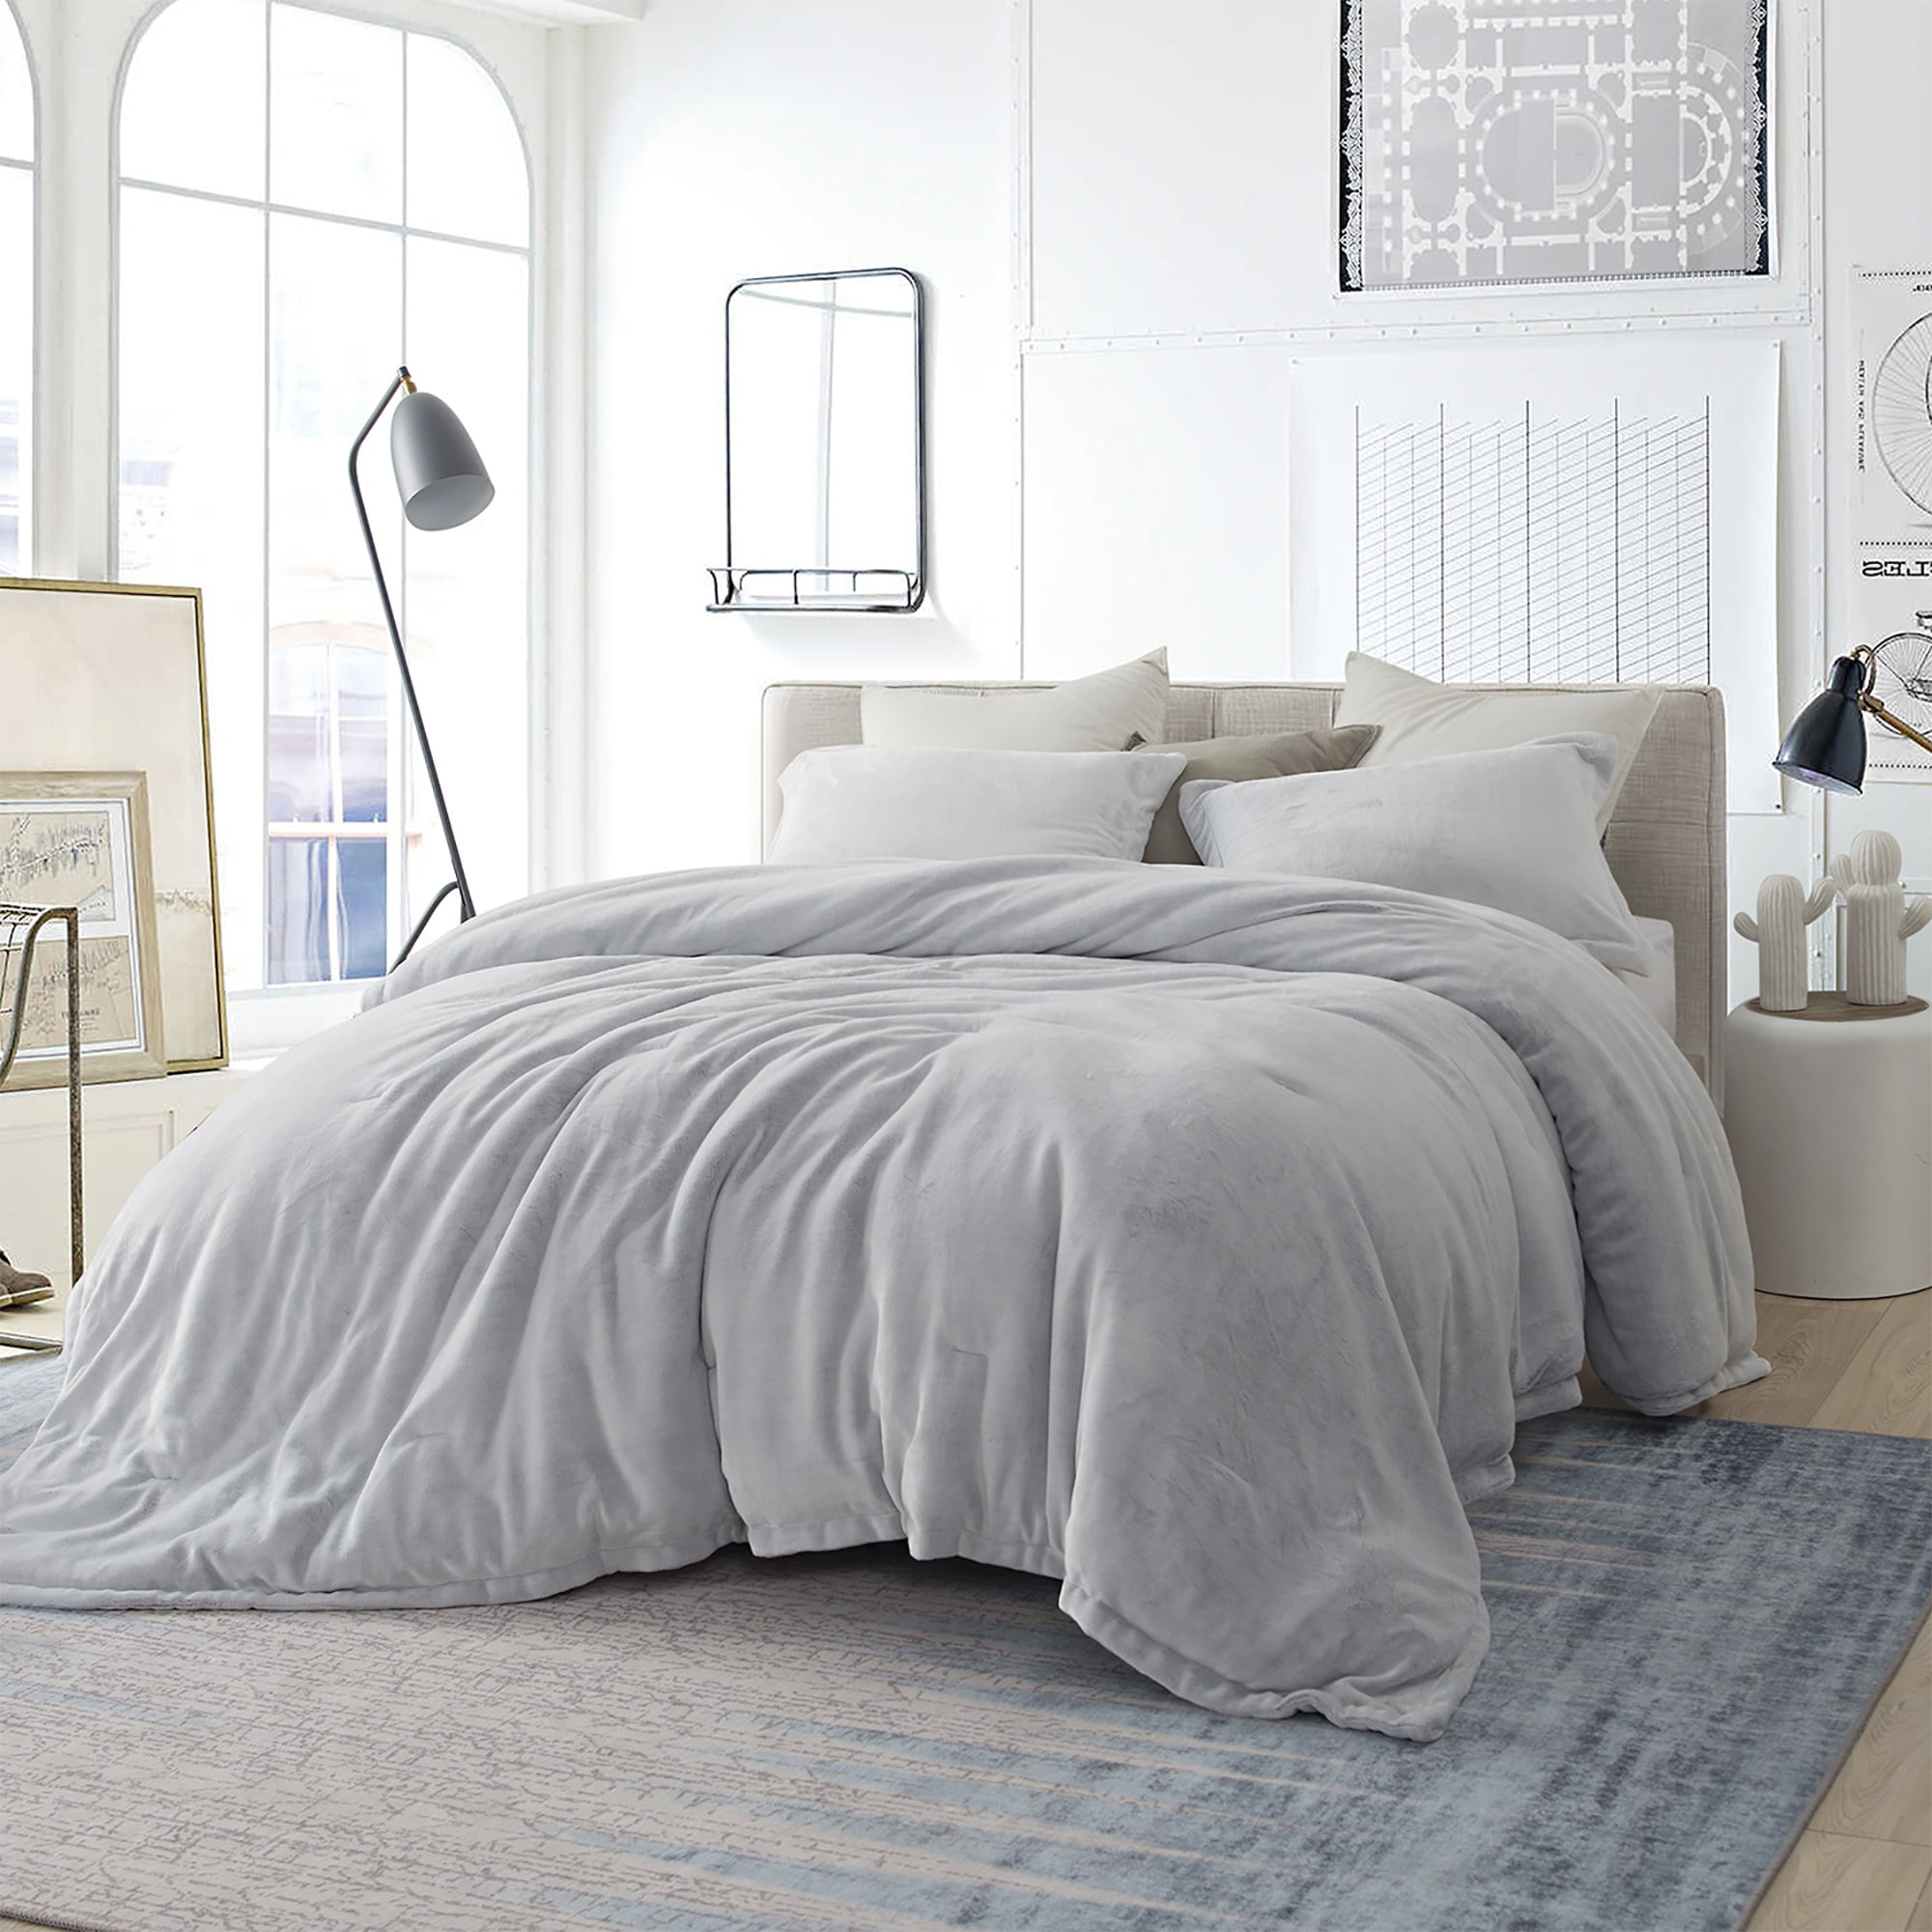 Coma Inducer Oversized Comforter, Gray And White Twin Xl Bedding